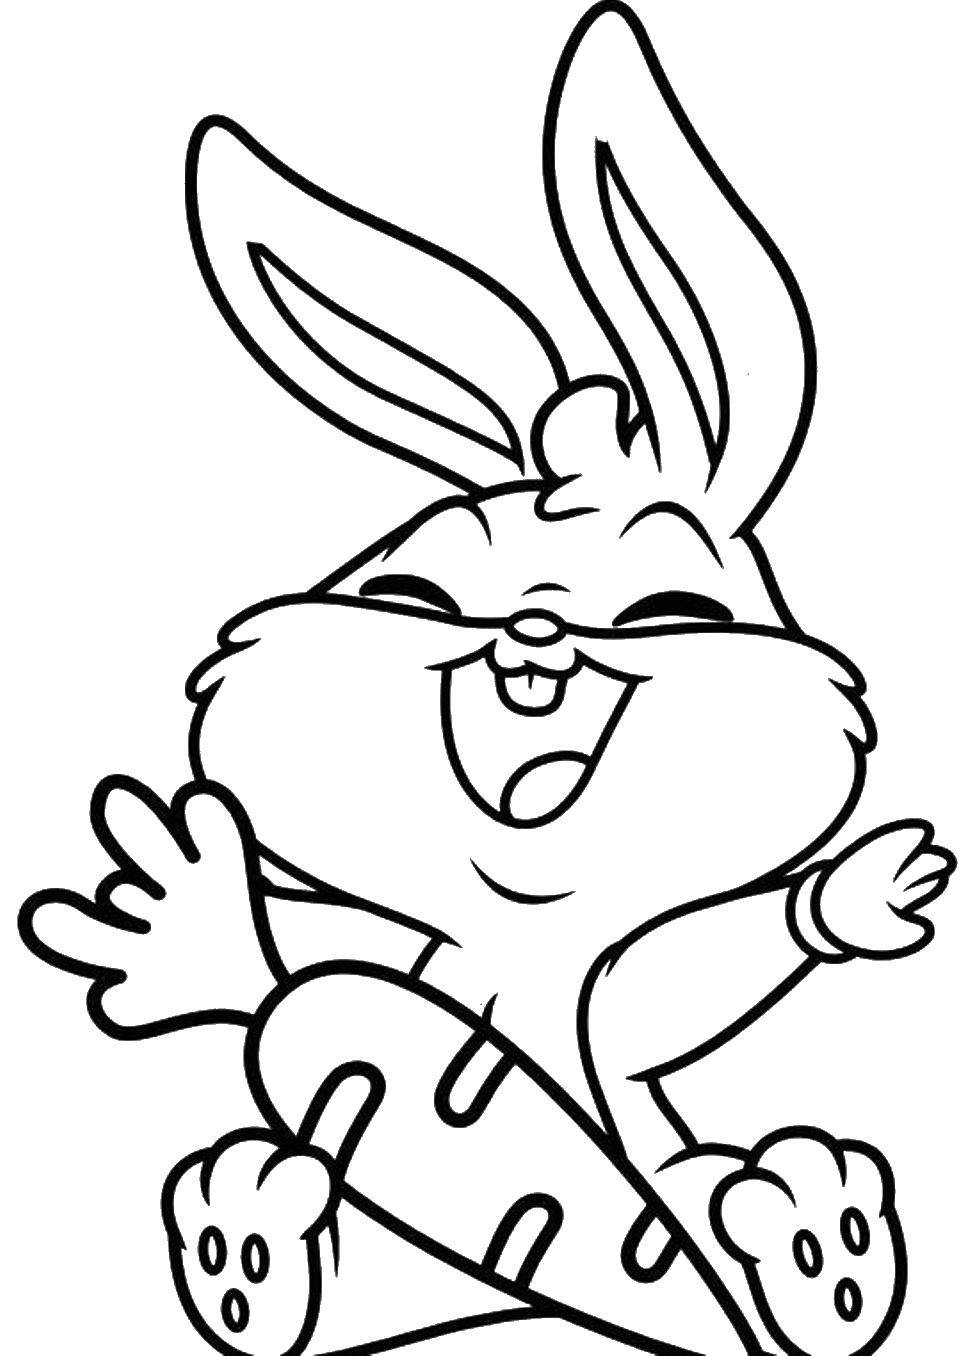 Coloring Bugs Bunny with carrot. Category the rabbit. Tags:  bugs Bunny, carrot.